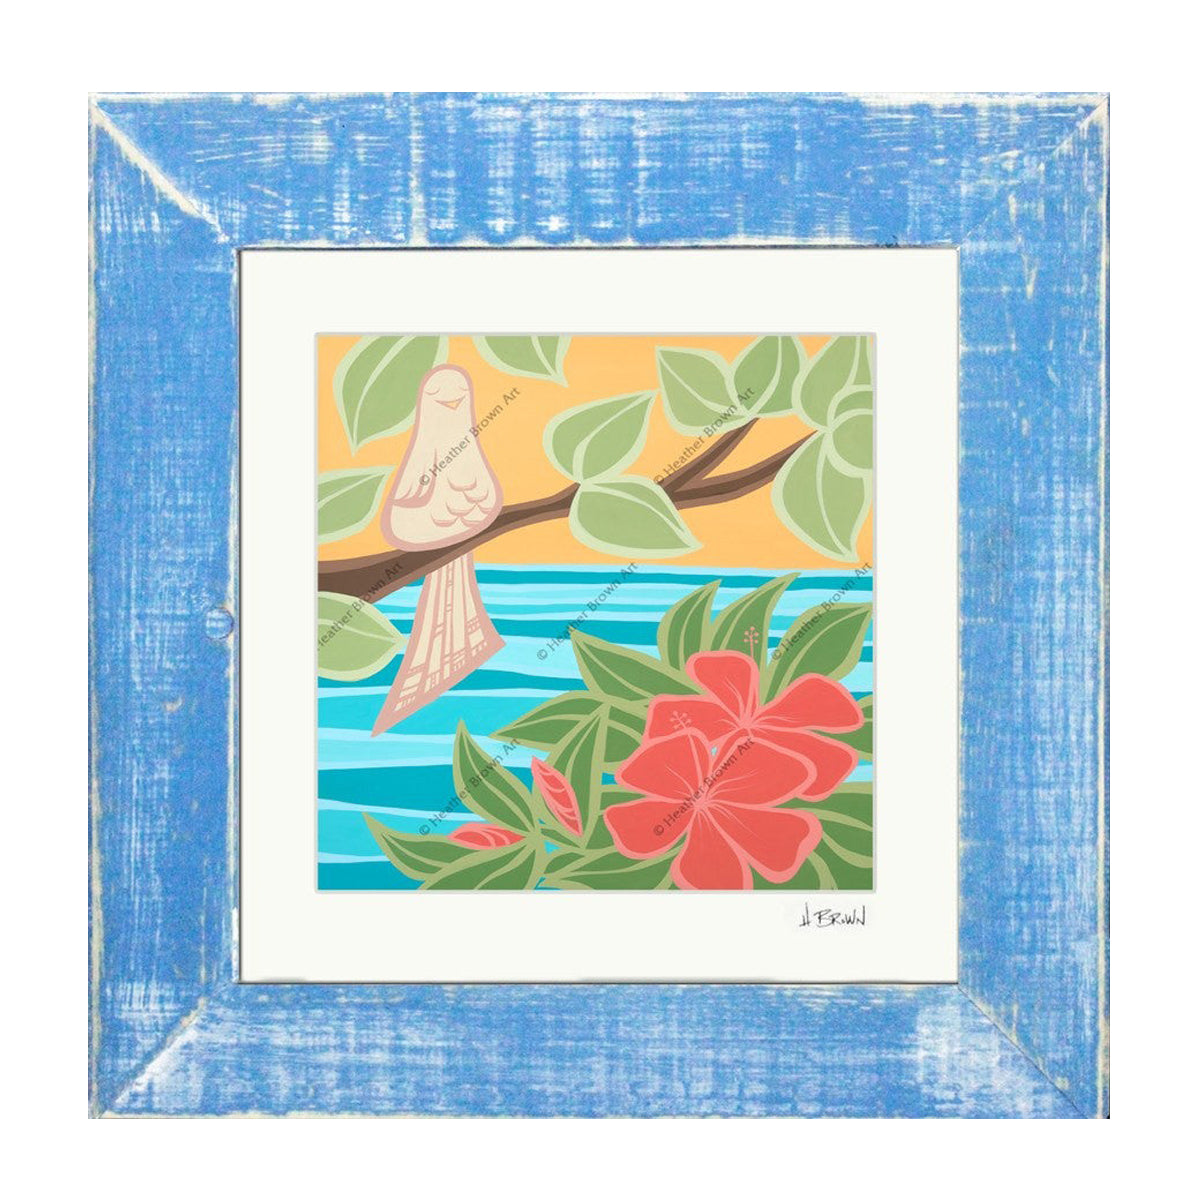 Peaceful Bird - Matted Print on Paper with Classic Blue, Reclaimed Wood Frame by Hawaii surf artist Heather Brown